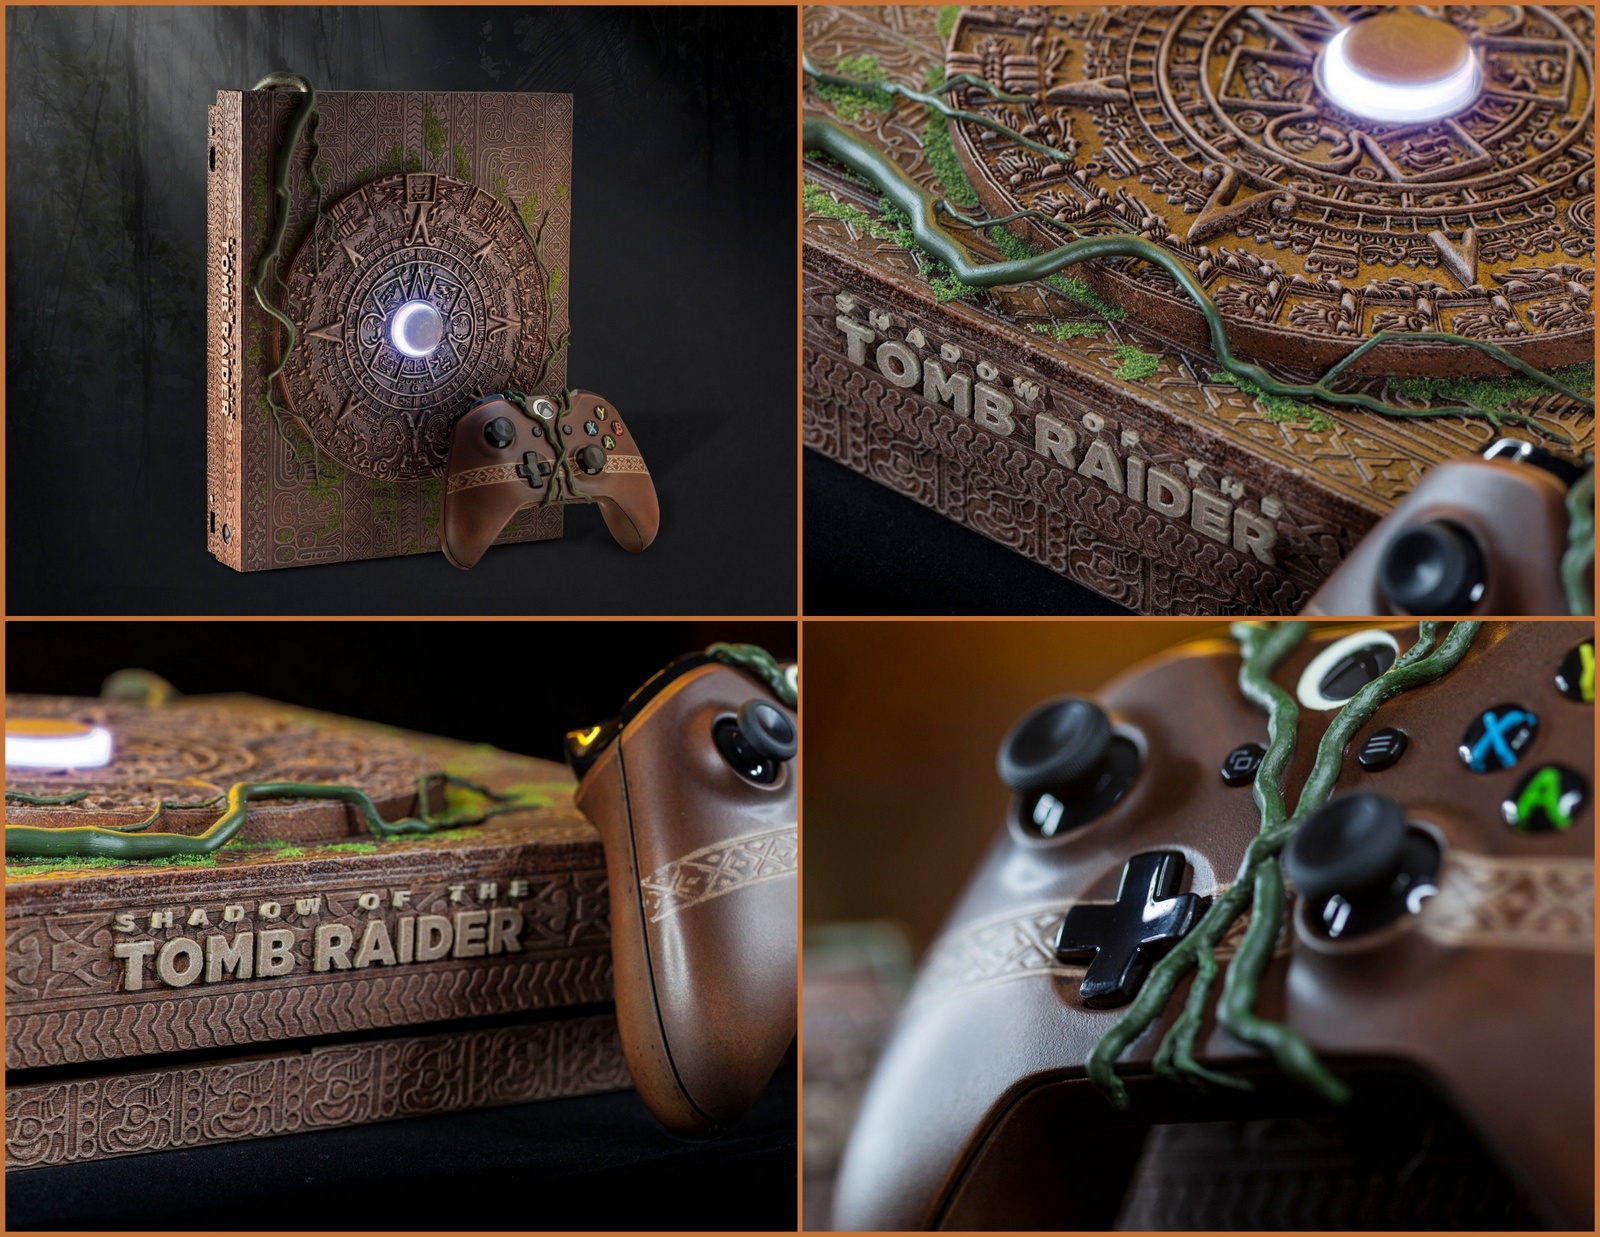 This Limited Edition Shadow Of The Tomb Raider Xbox One X Is The 